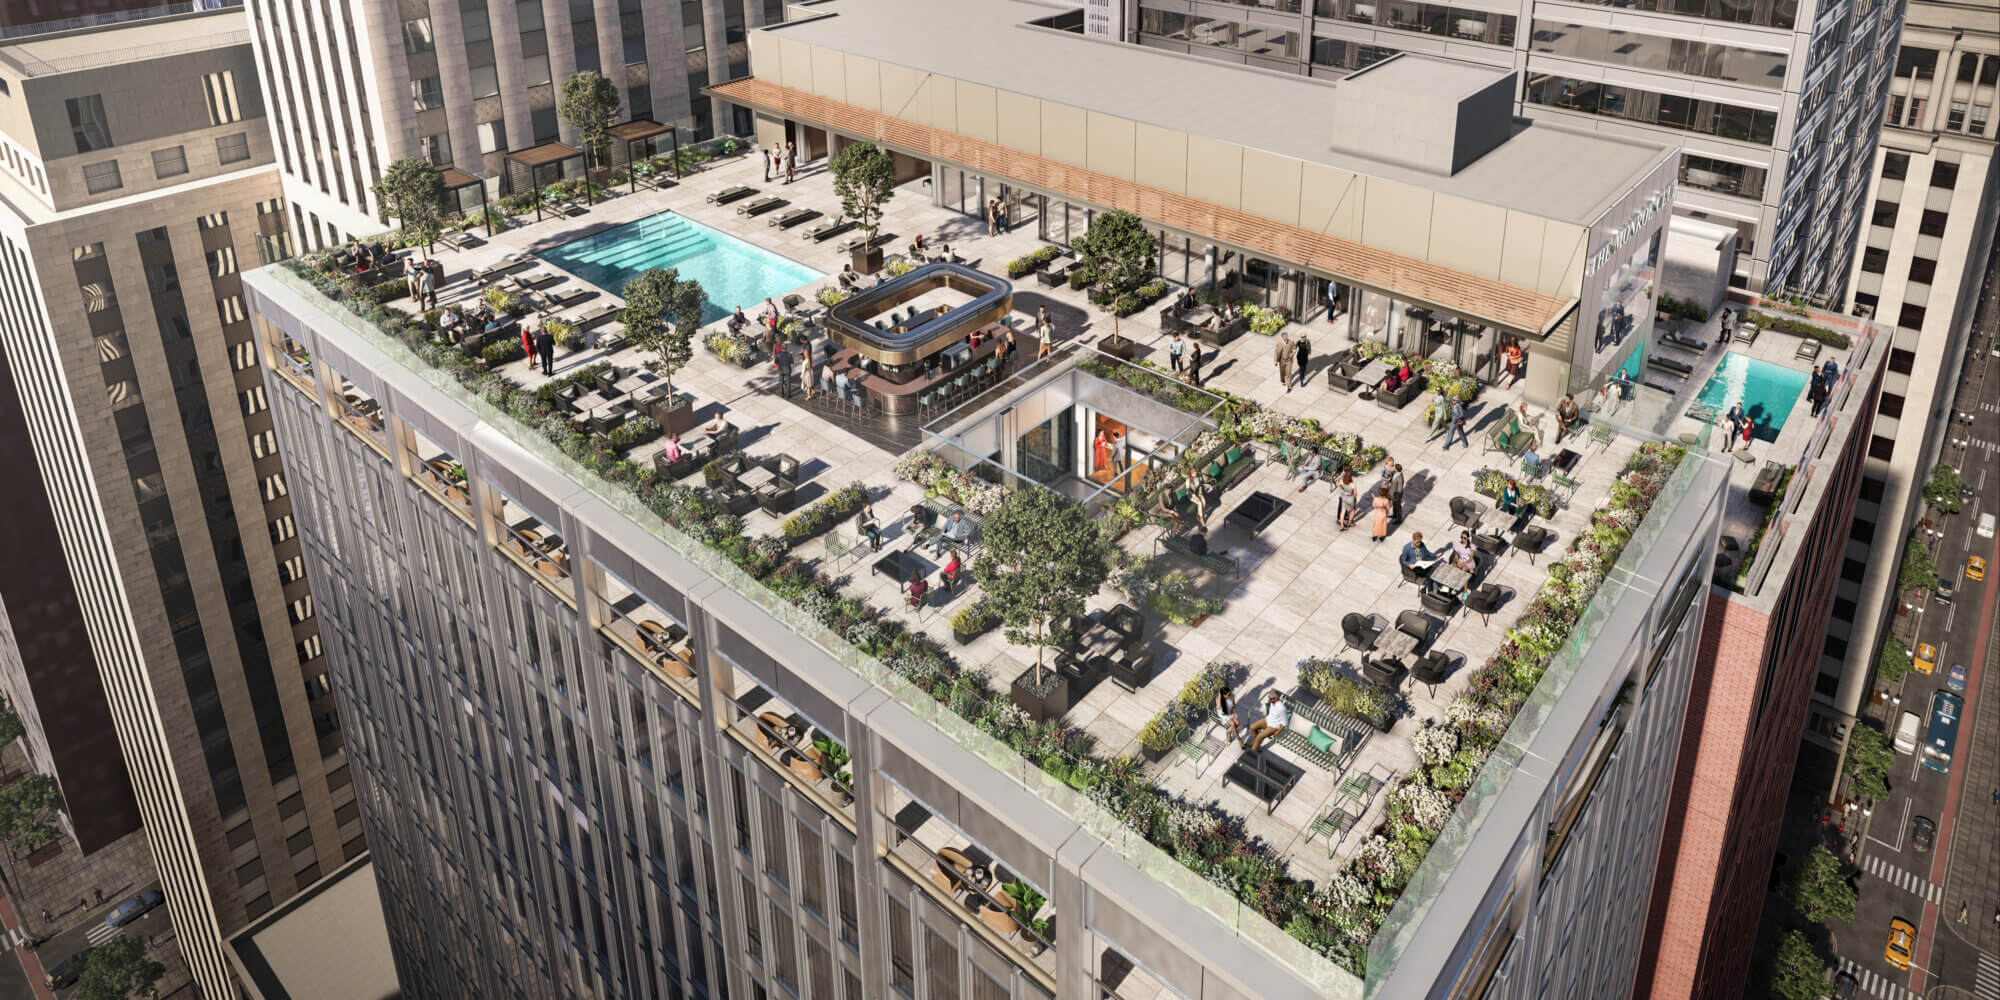 The Rebirth of 111 West Monroe: A New Chapter for Chicago’s Historic LaSalle Street Corridor